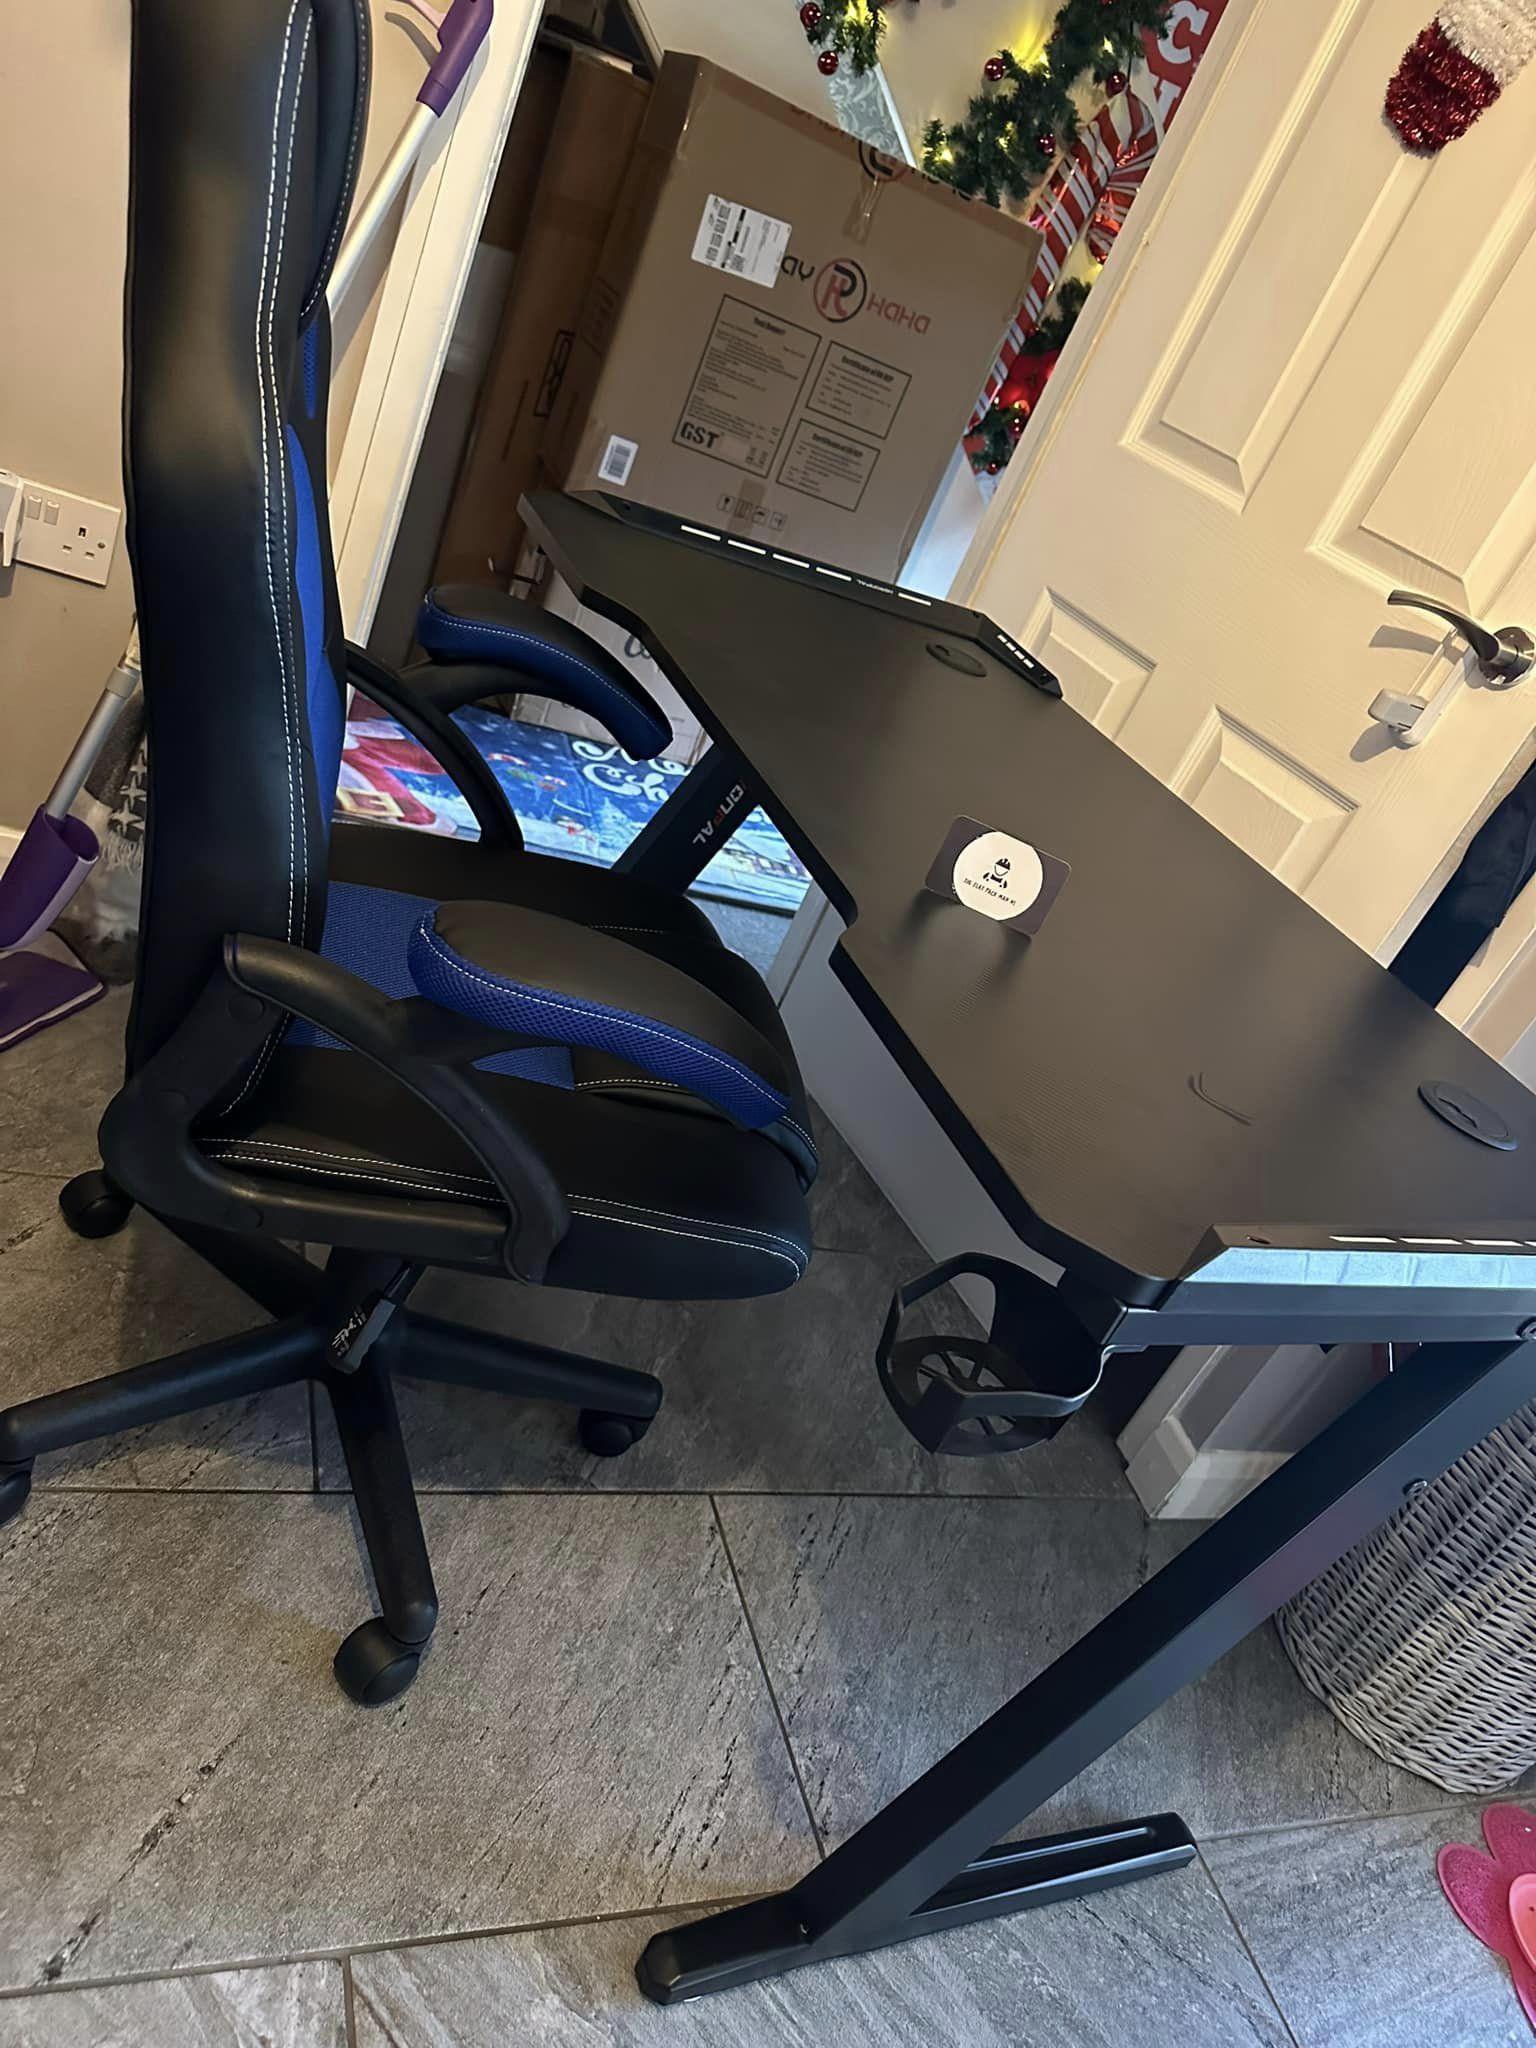 Gaming chair with black gaming desk